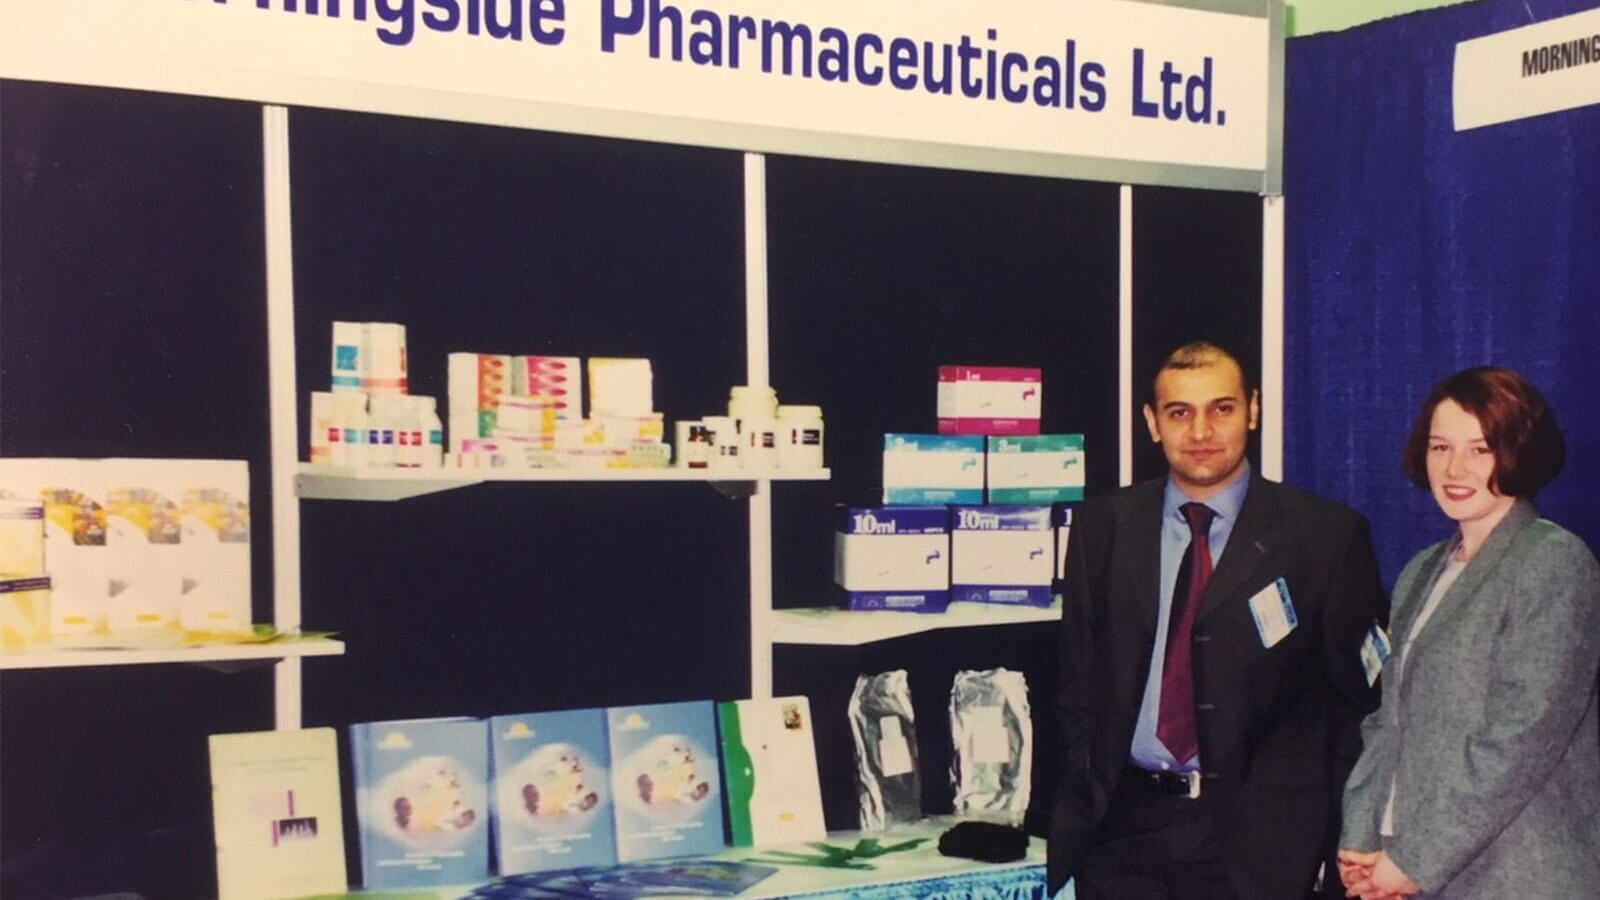 Morningside Pharmaceuticals Ltd has a rich history